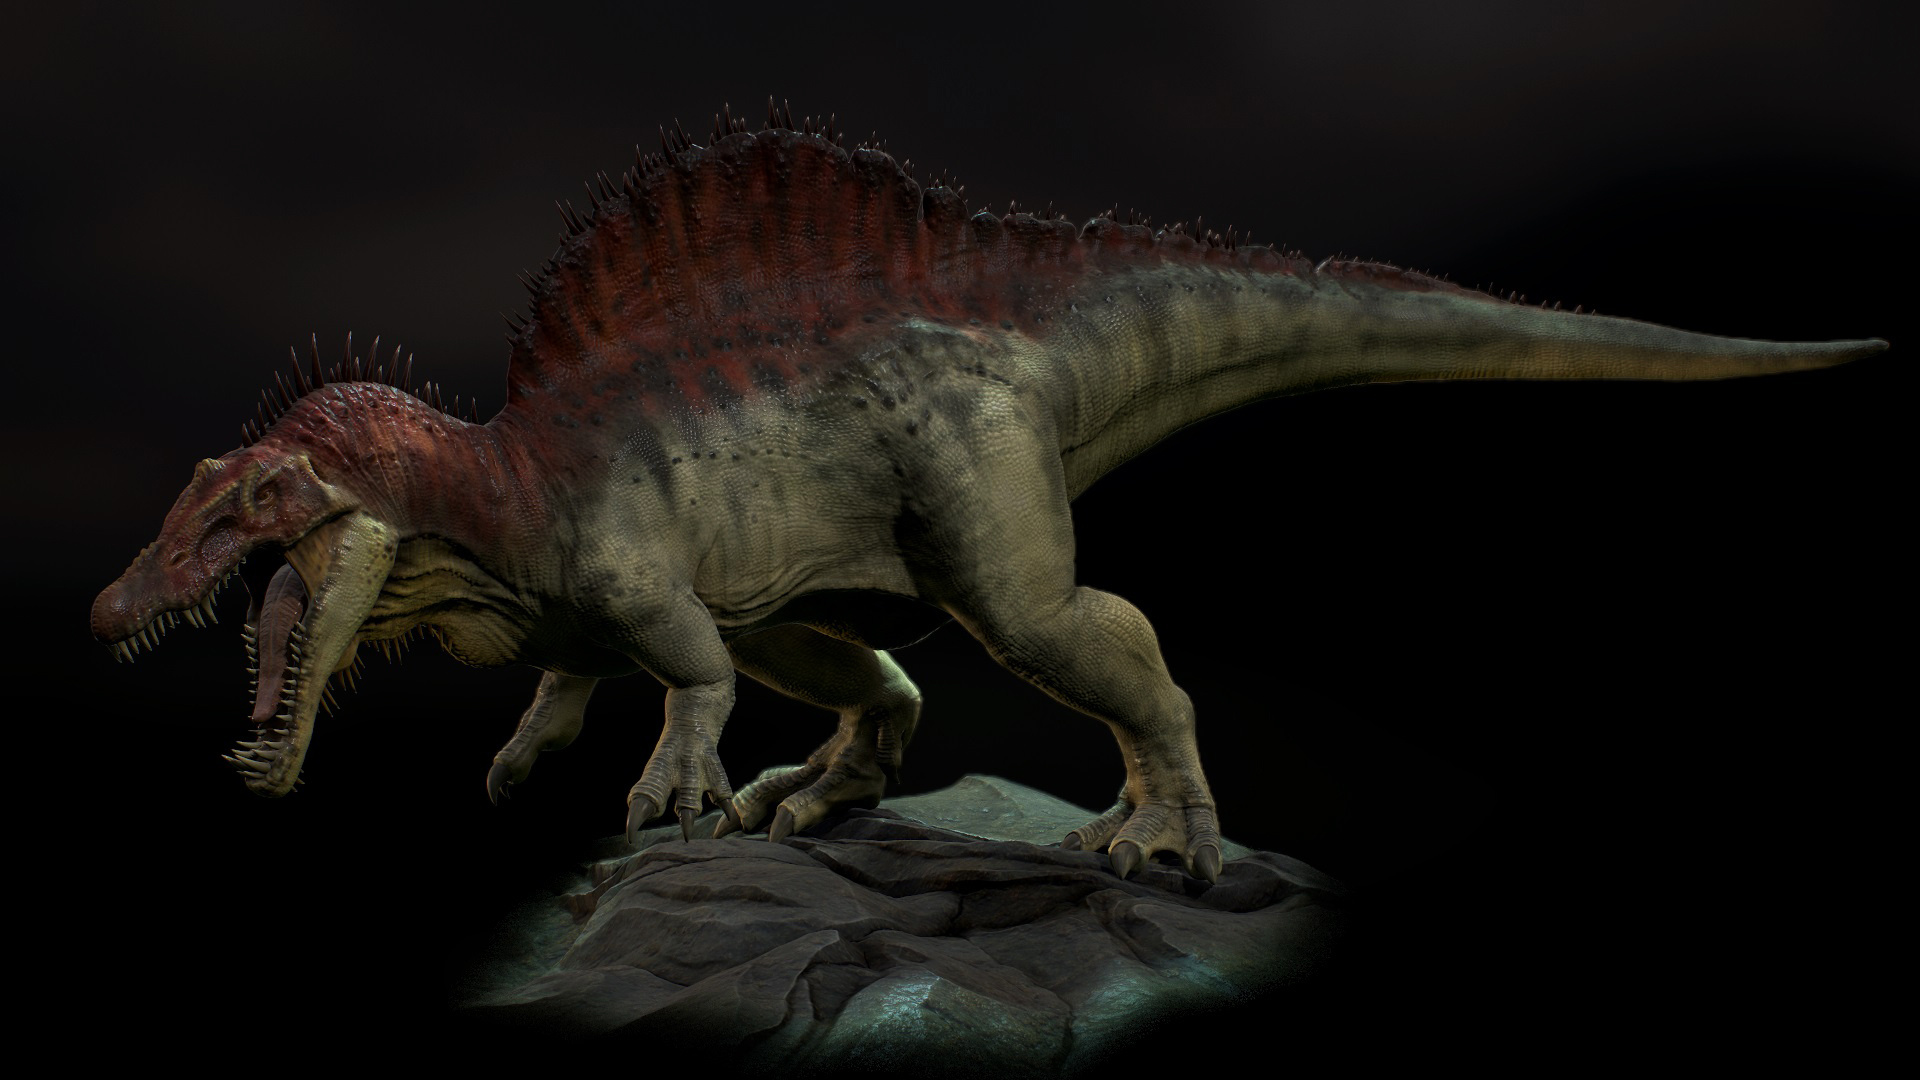 Guardians of Orion, Phase 2 first look, Spinosaurus character, Sci-fi game, 1920x1080 Full HD Desktop